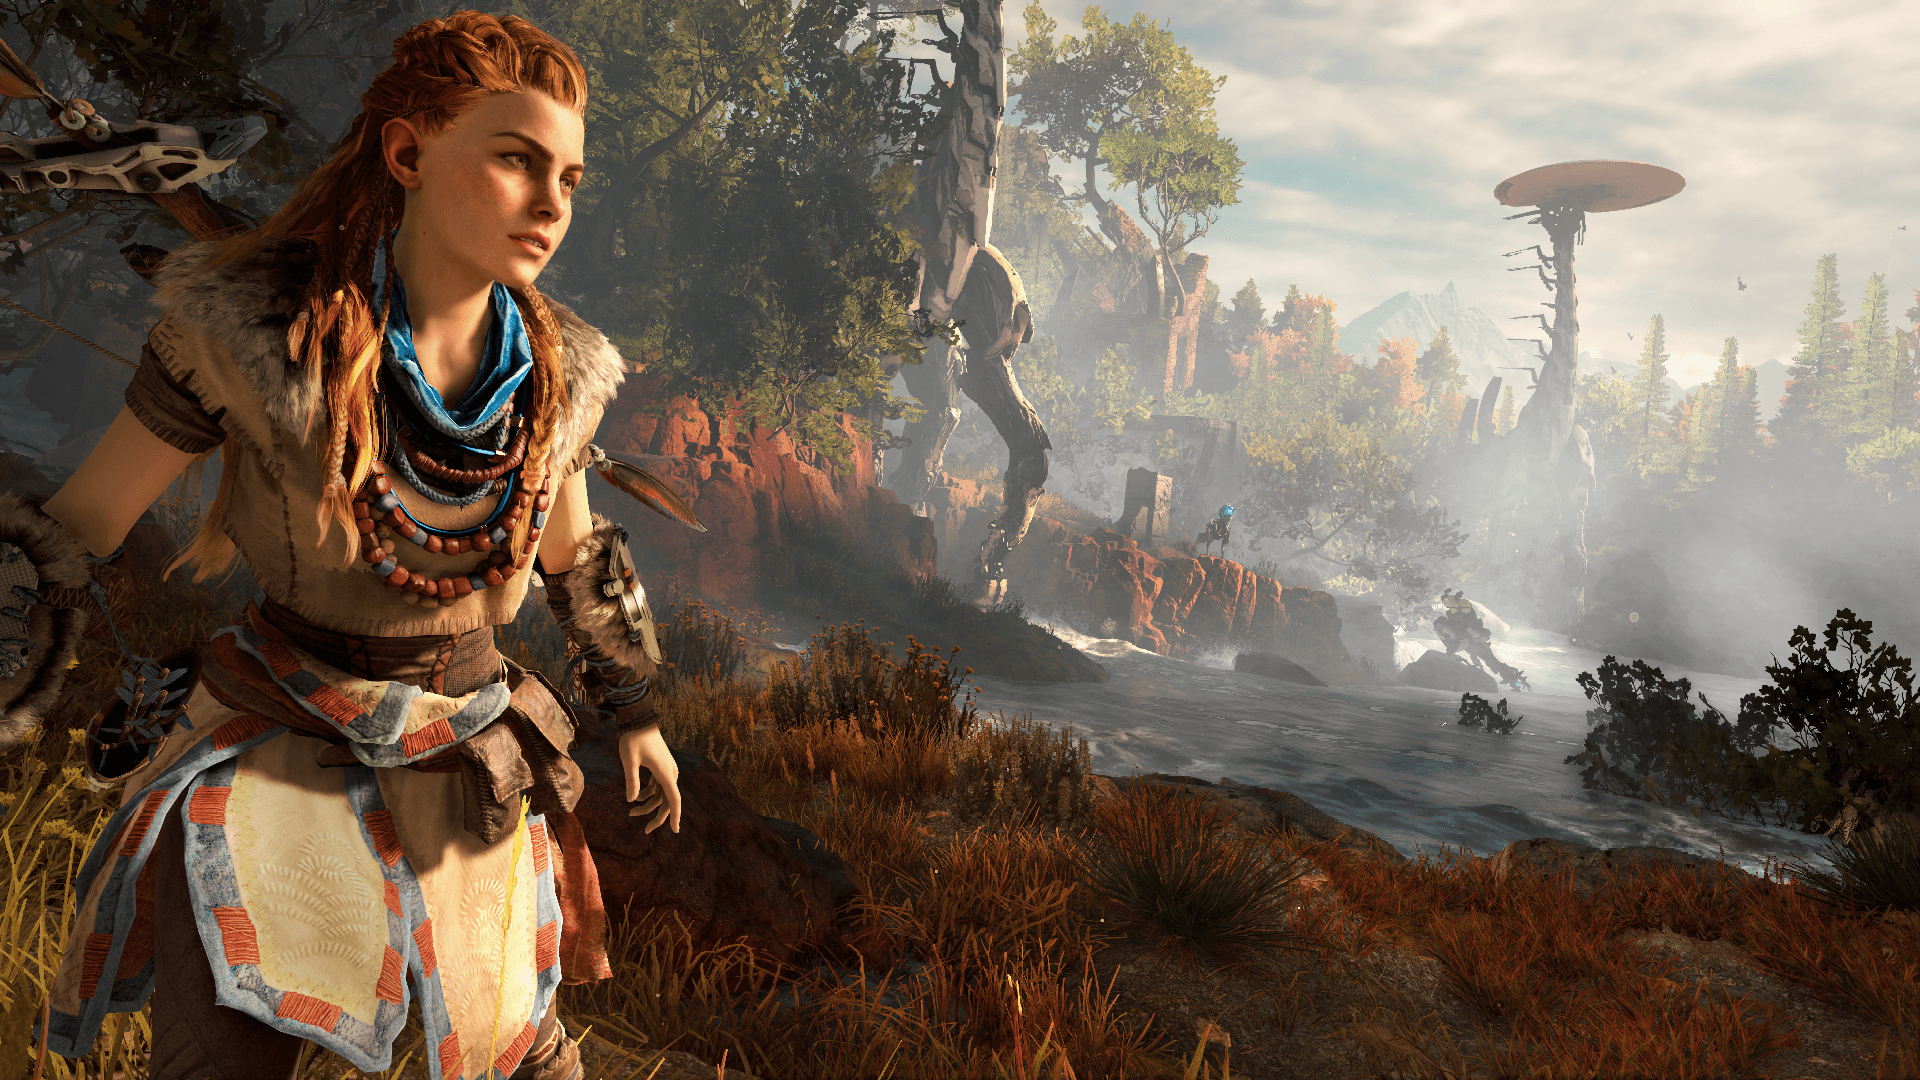 You can play Horizon Zero Dawn, one of the best PS4 exclusives, on PC soon  via PS Now | PC Gamer